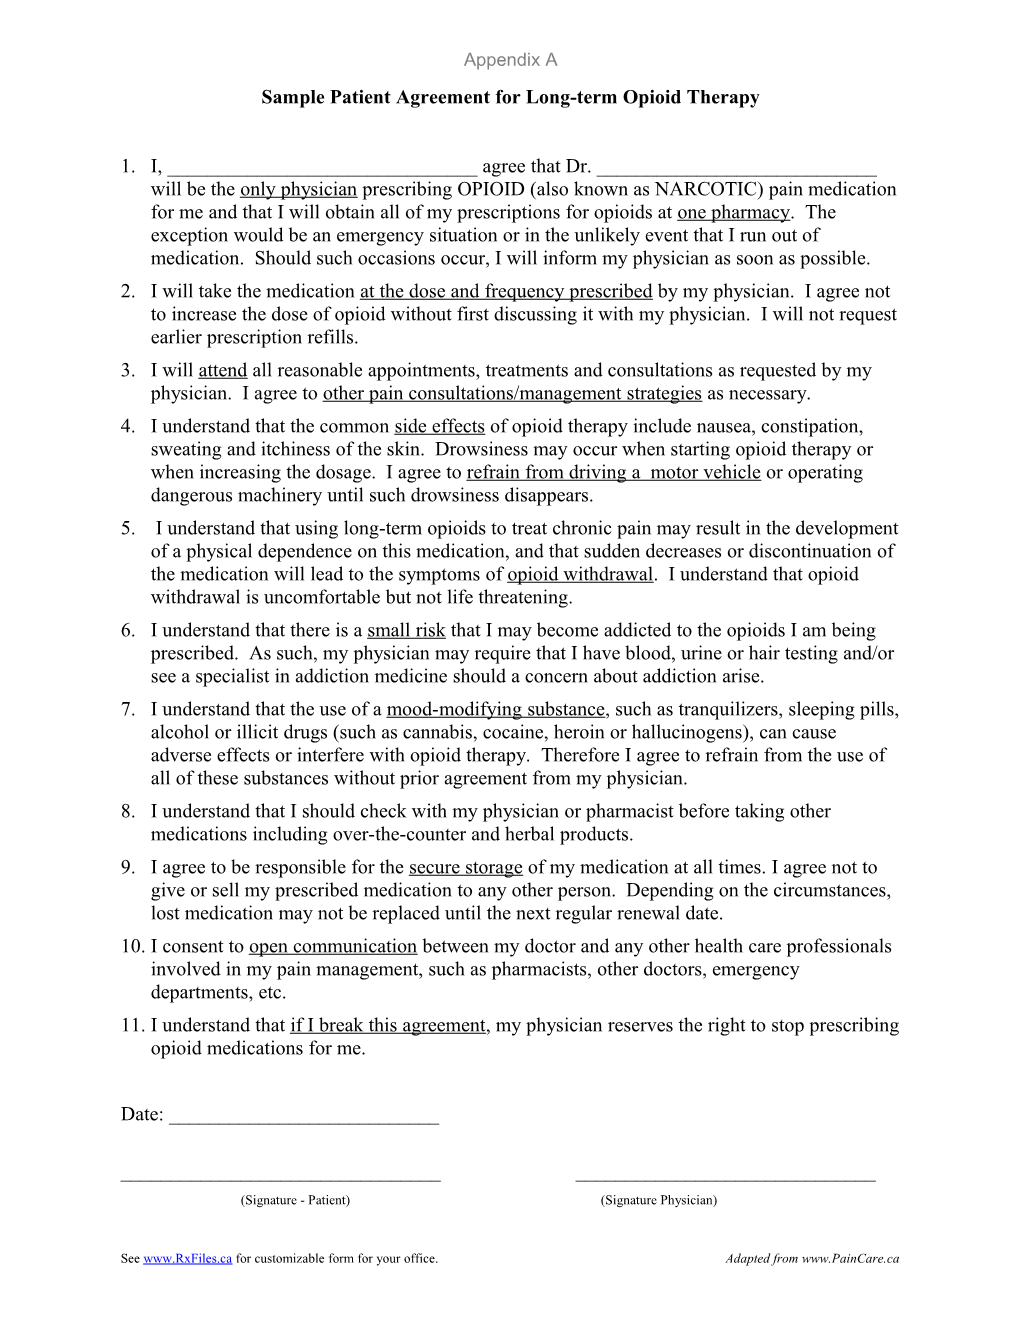 Sample Patient Agreement for Long-Term Opioid Therapy